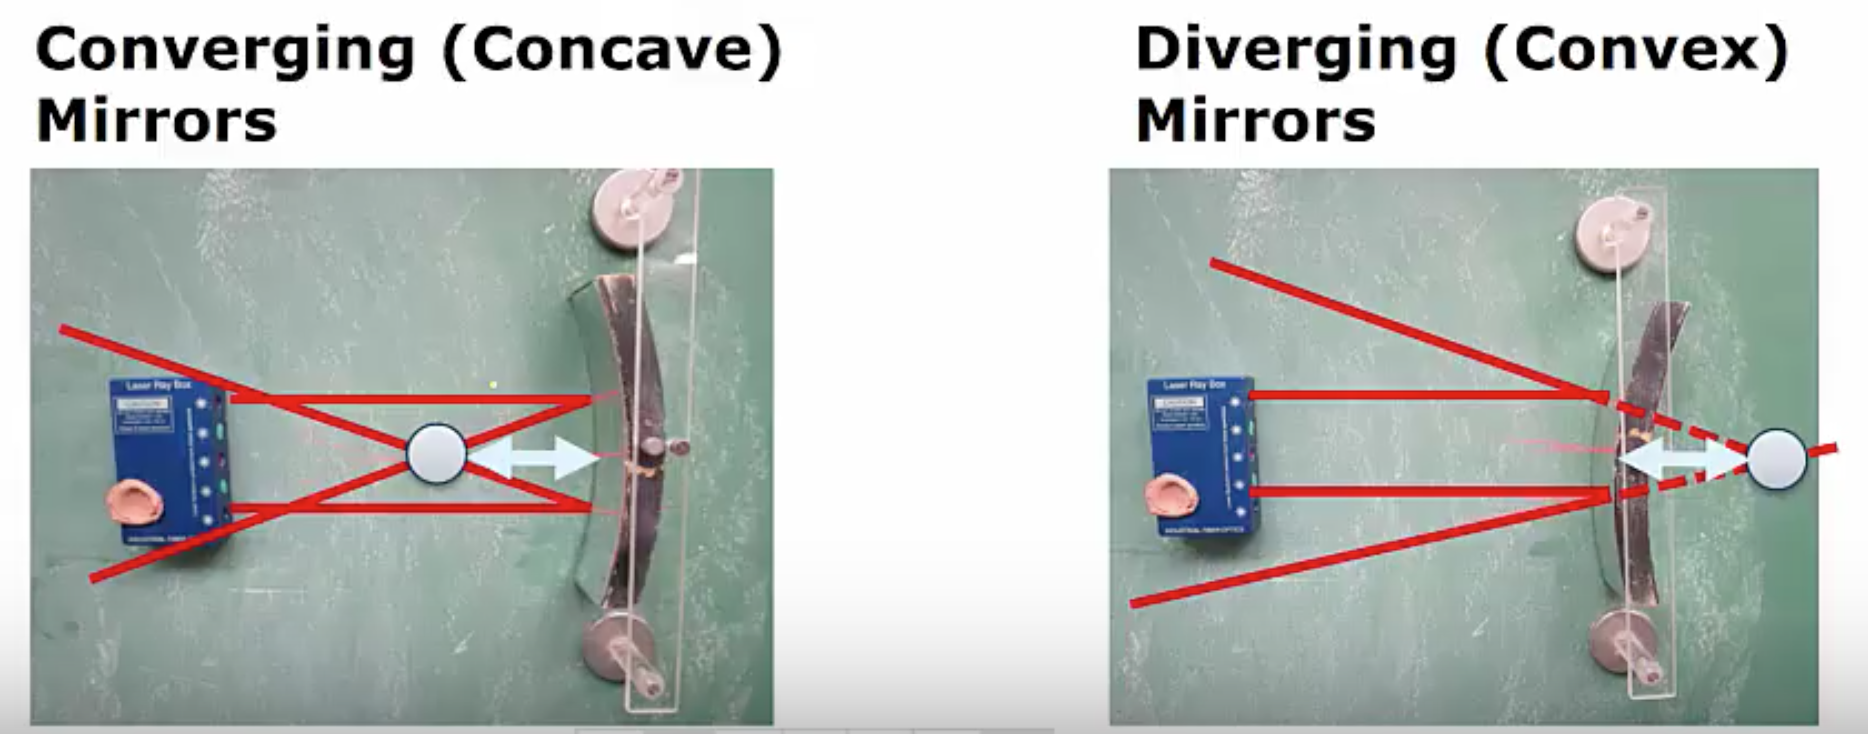 Converging and Diverging Mirrors